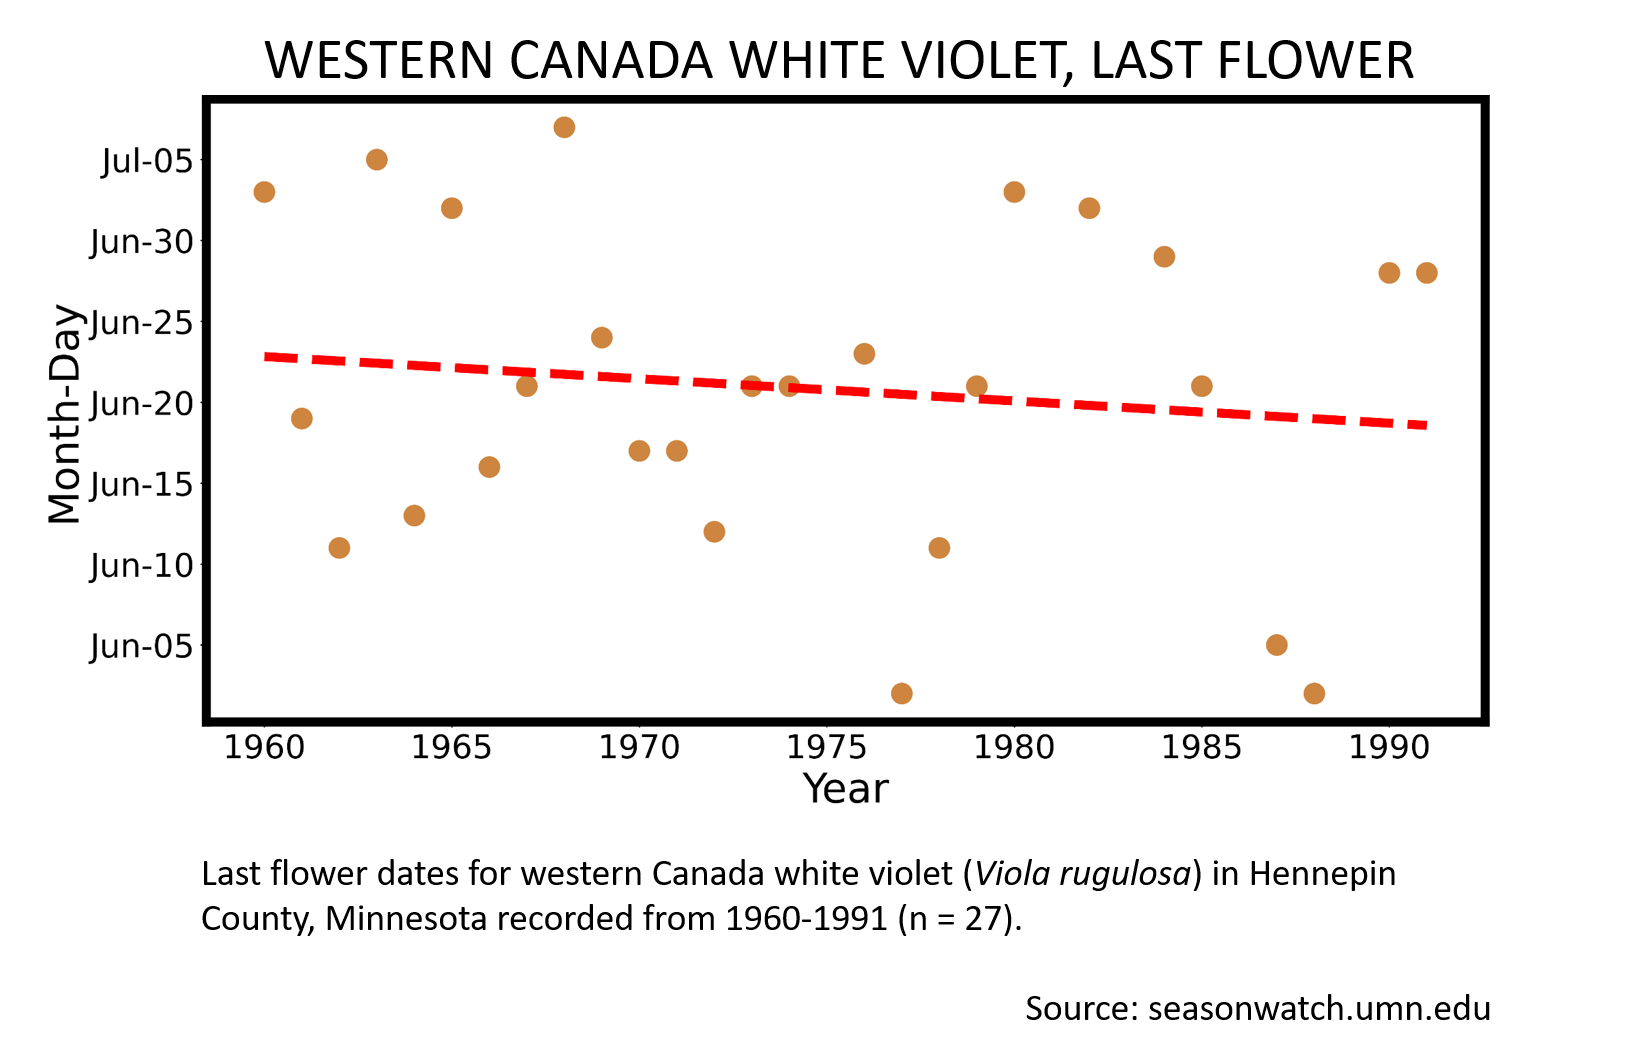 Scatterplot showing western Canada white violet phenology in Hennepin County, Minnesota